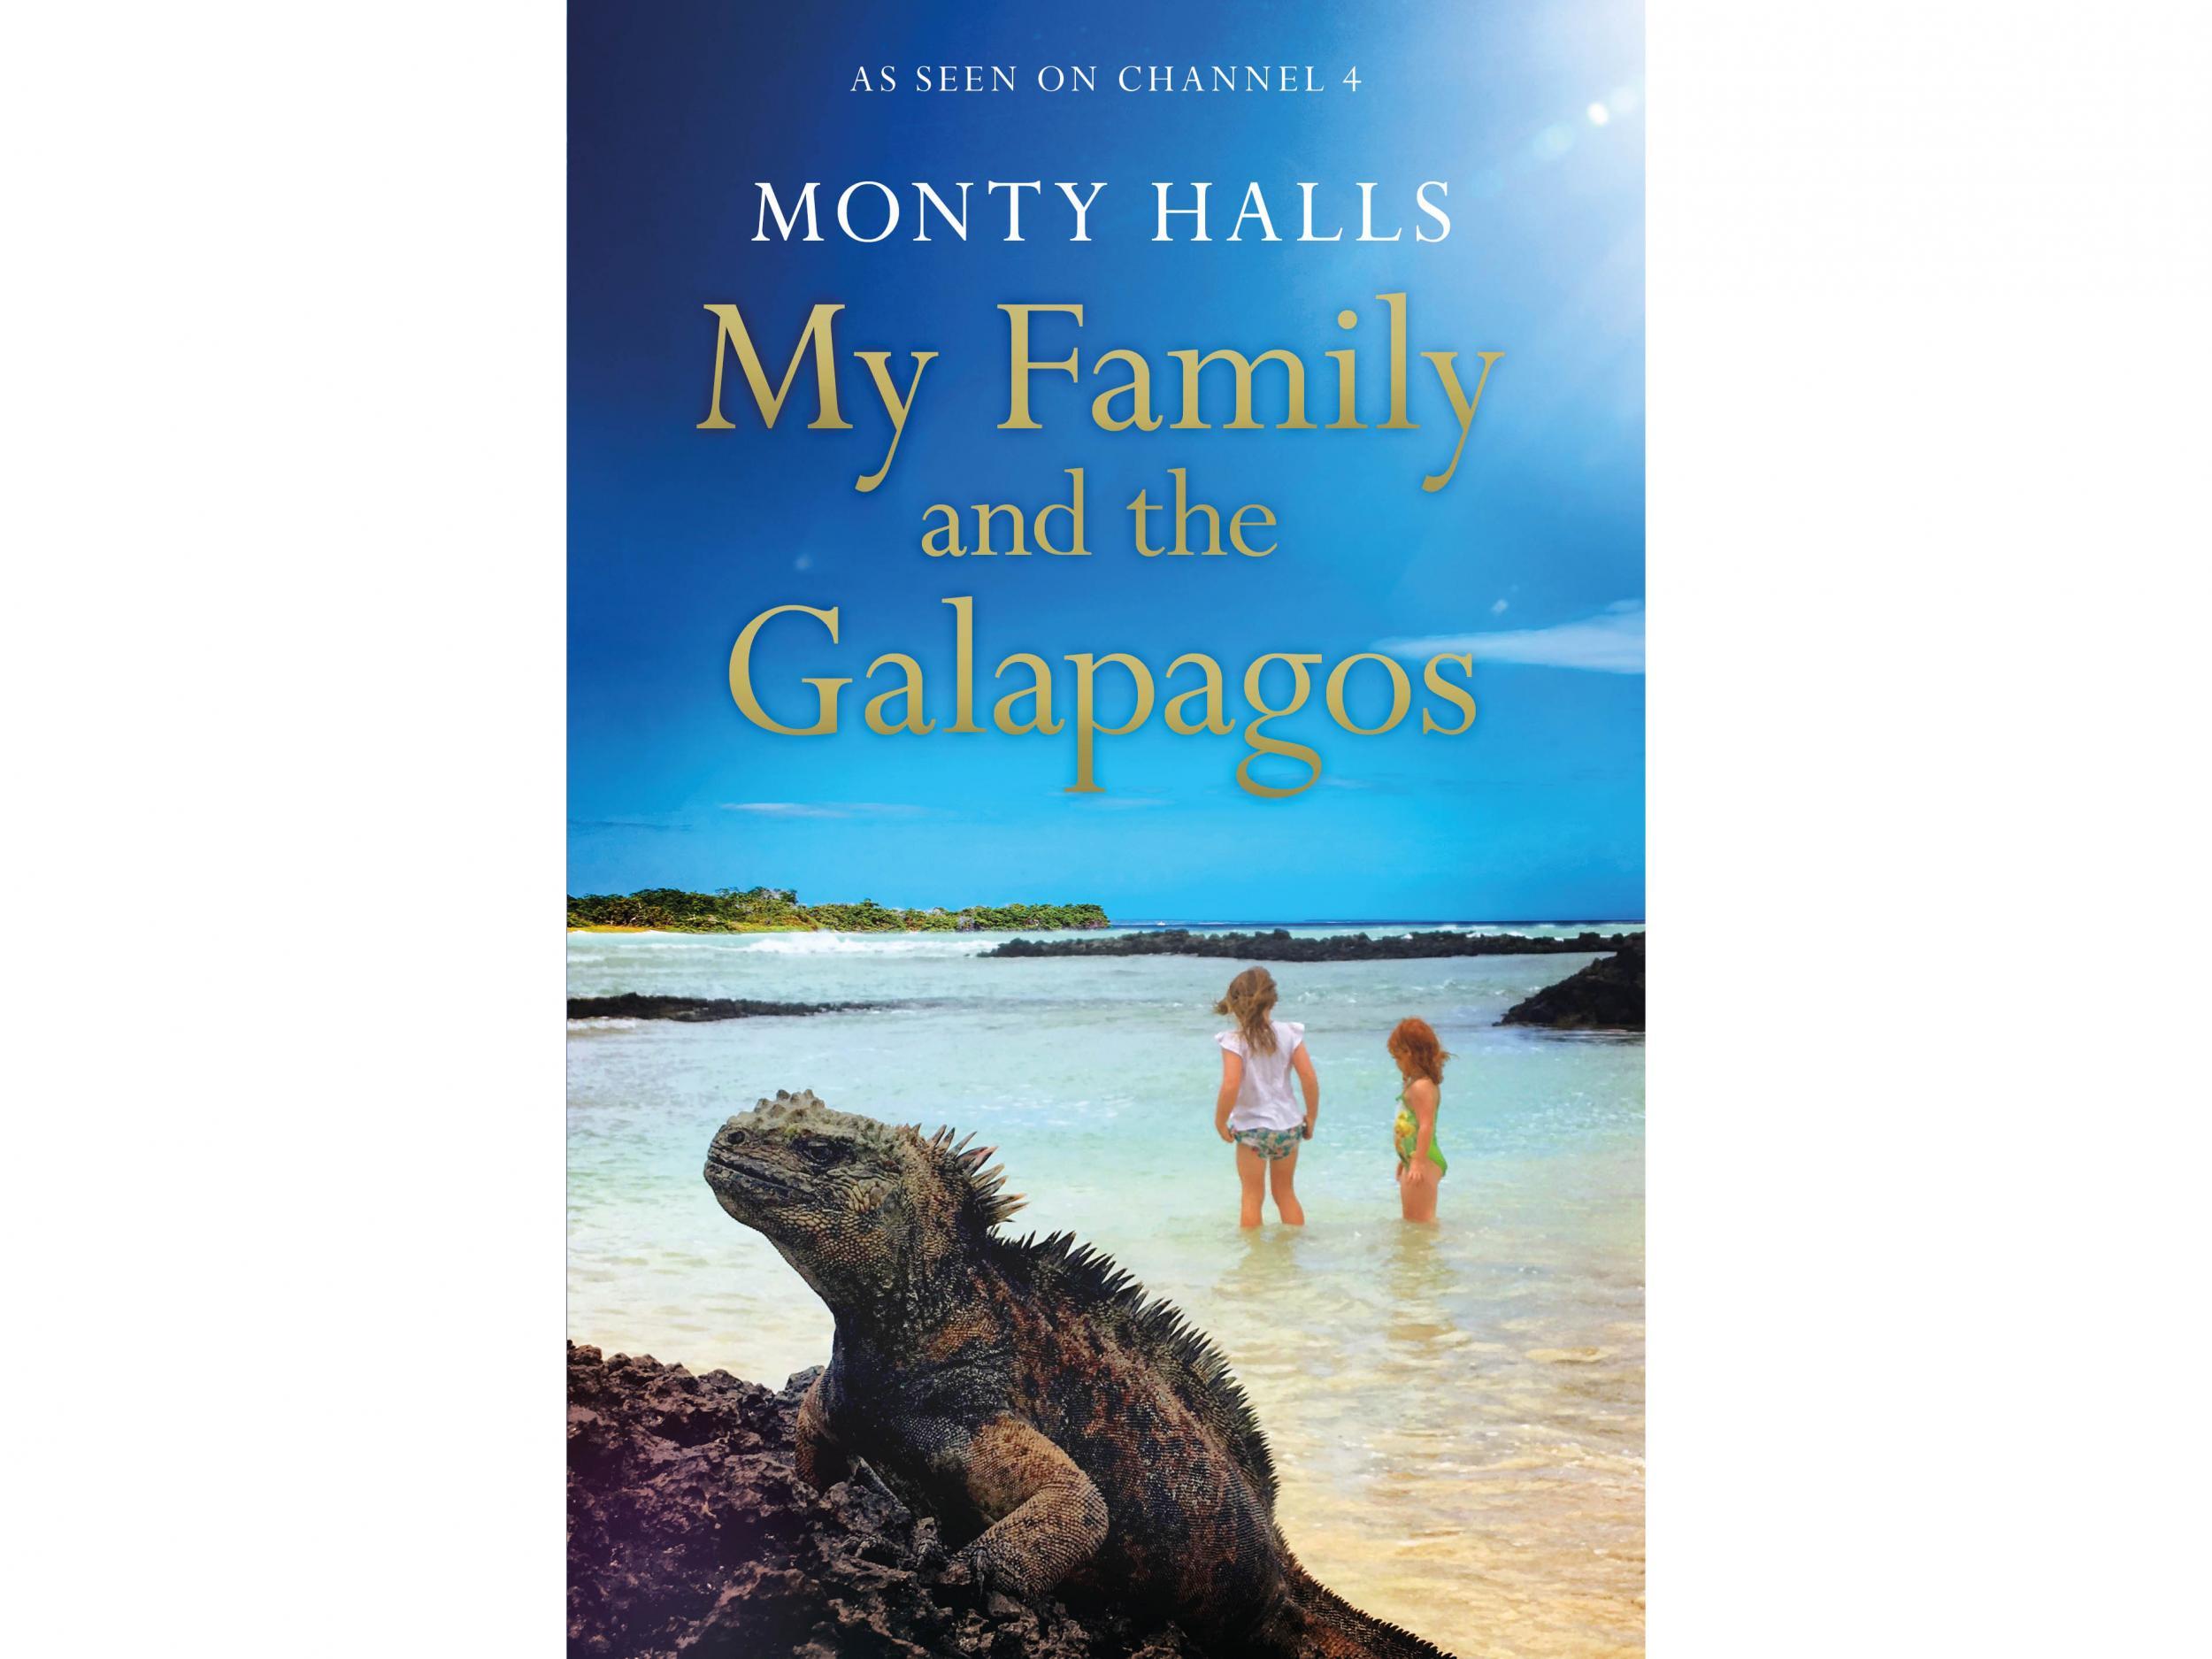 my-family-galapagos-indybest.jpg